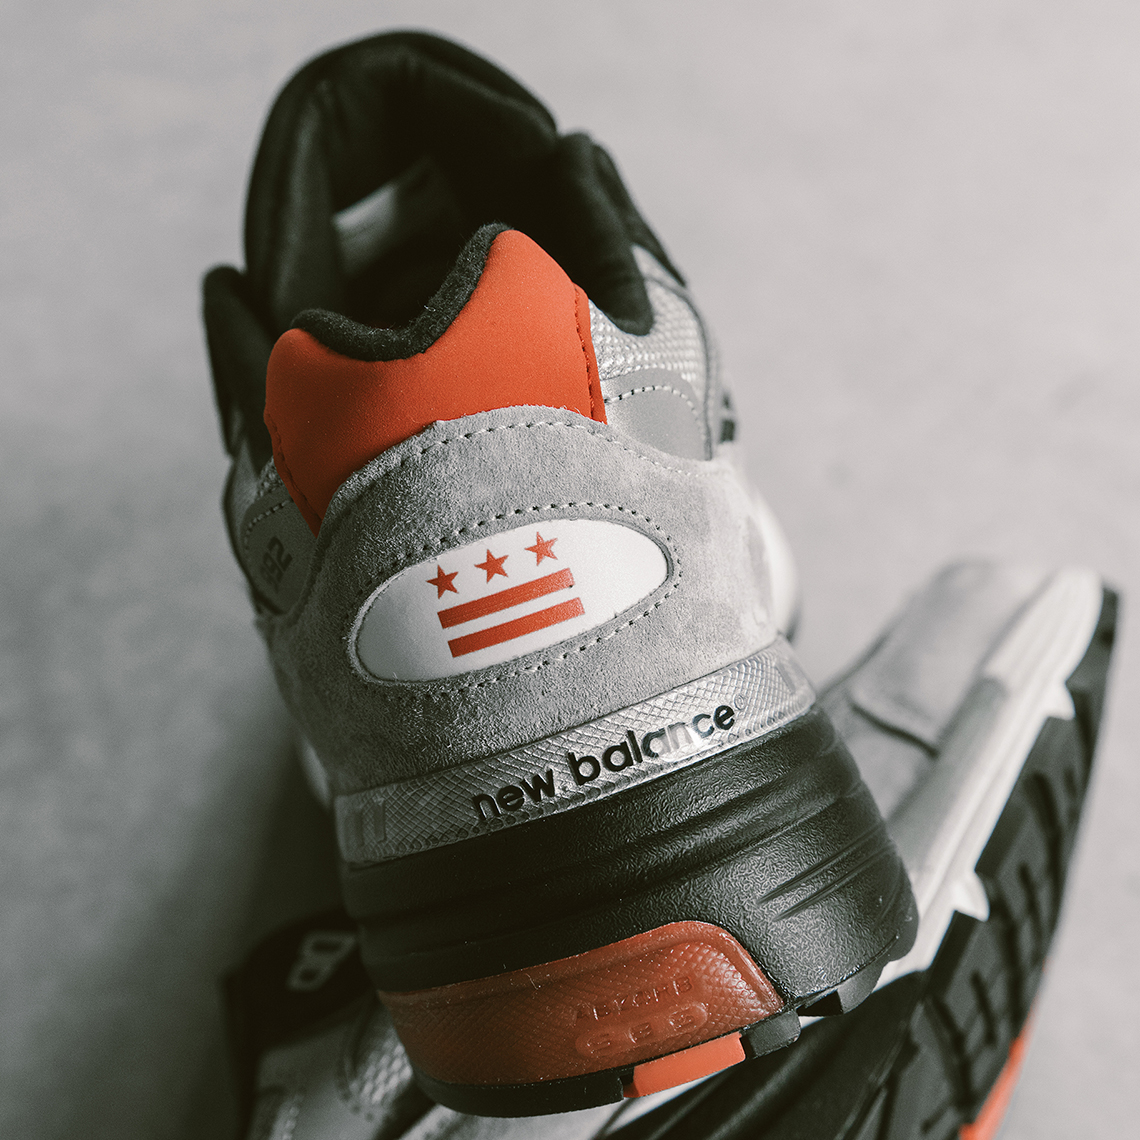 Dtlr New Balance 992 Dc Release Date 5